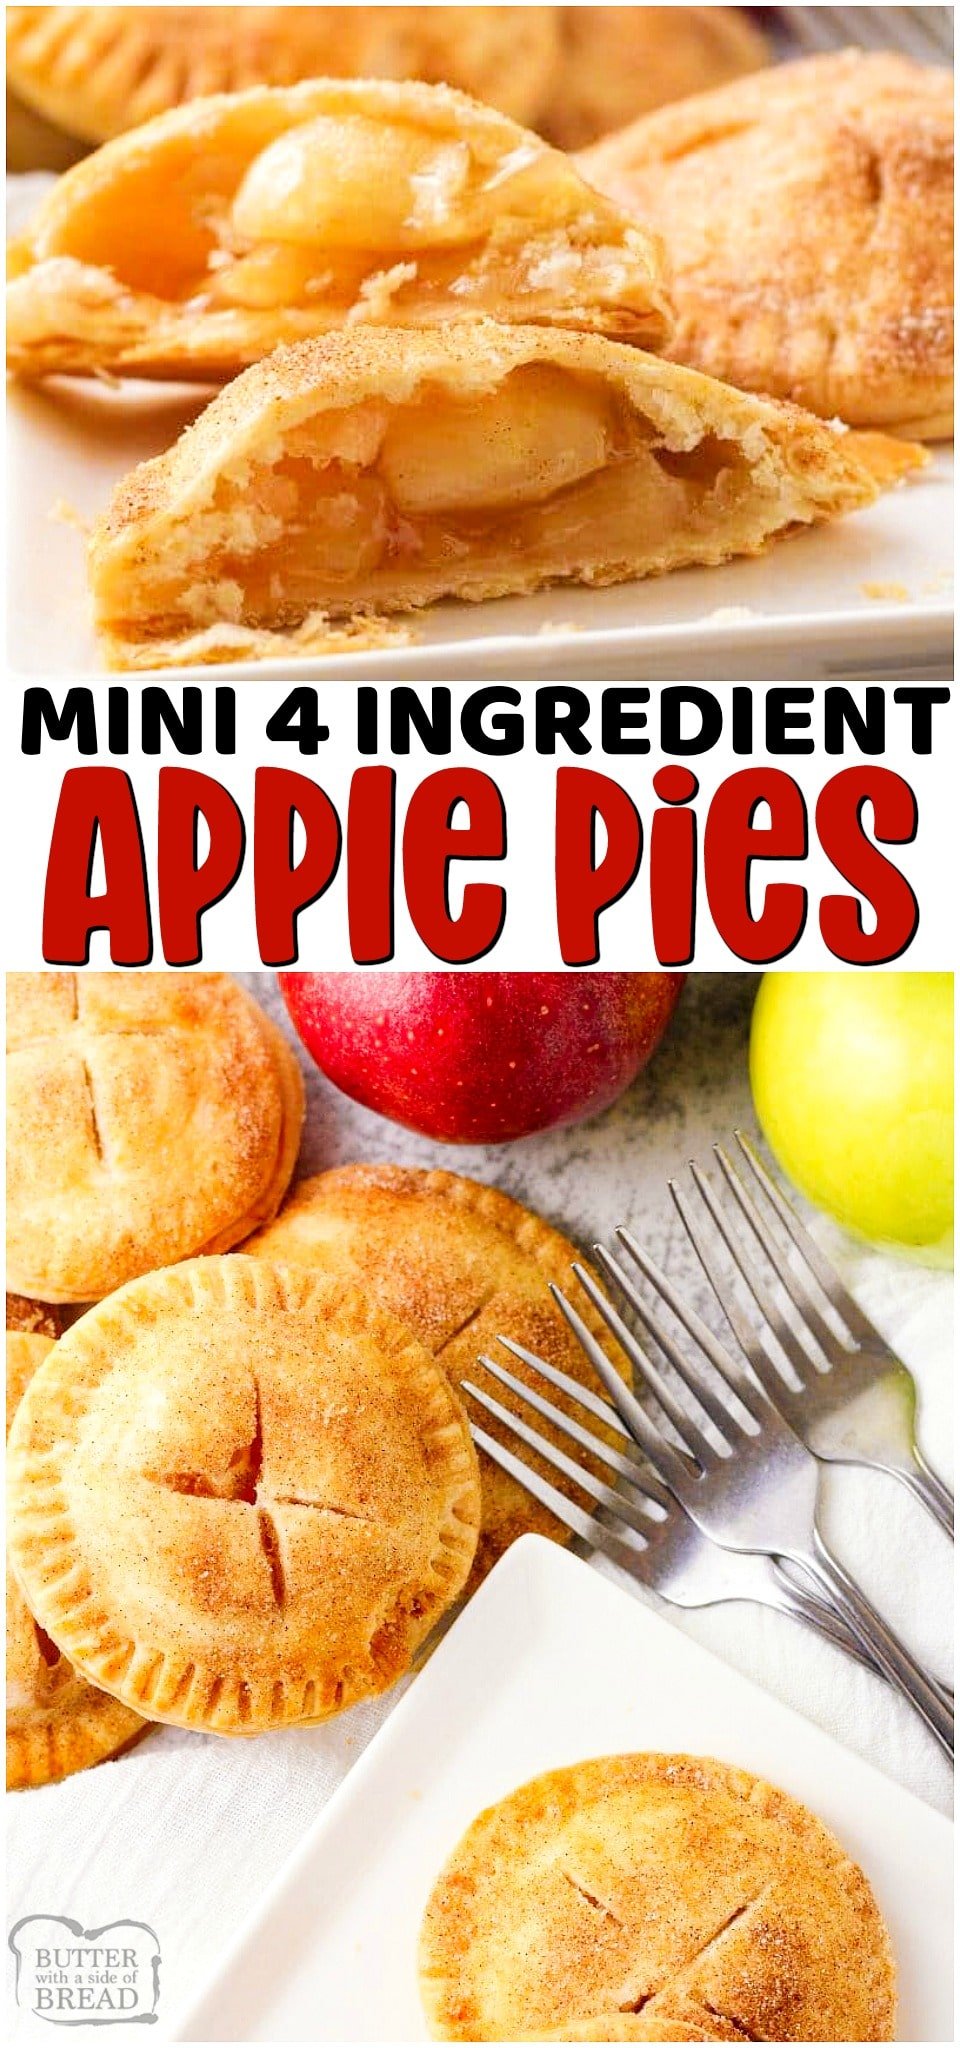 Mini Apple Pies are a simple 4 ingredient dessert made with flaky pie crust & apple pie filling. Lovely tastes of apple pie only so much easier to make!